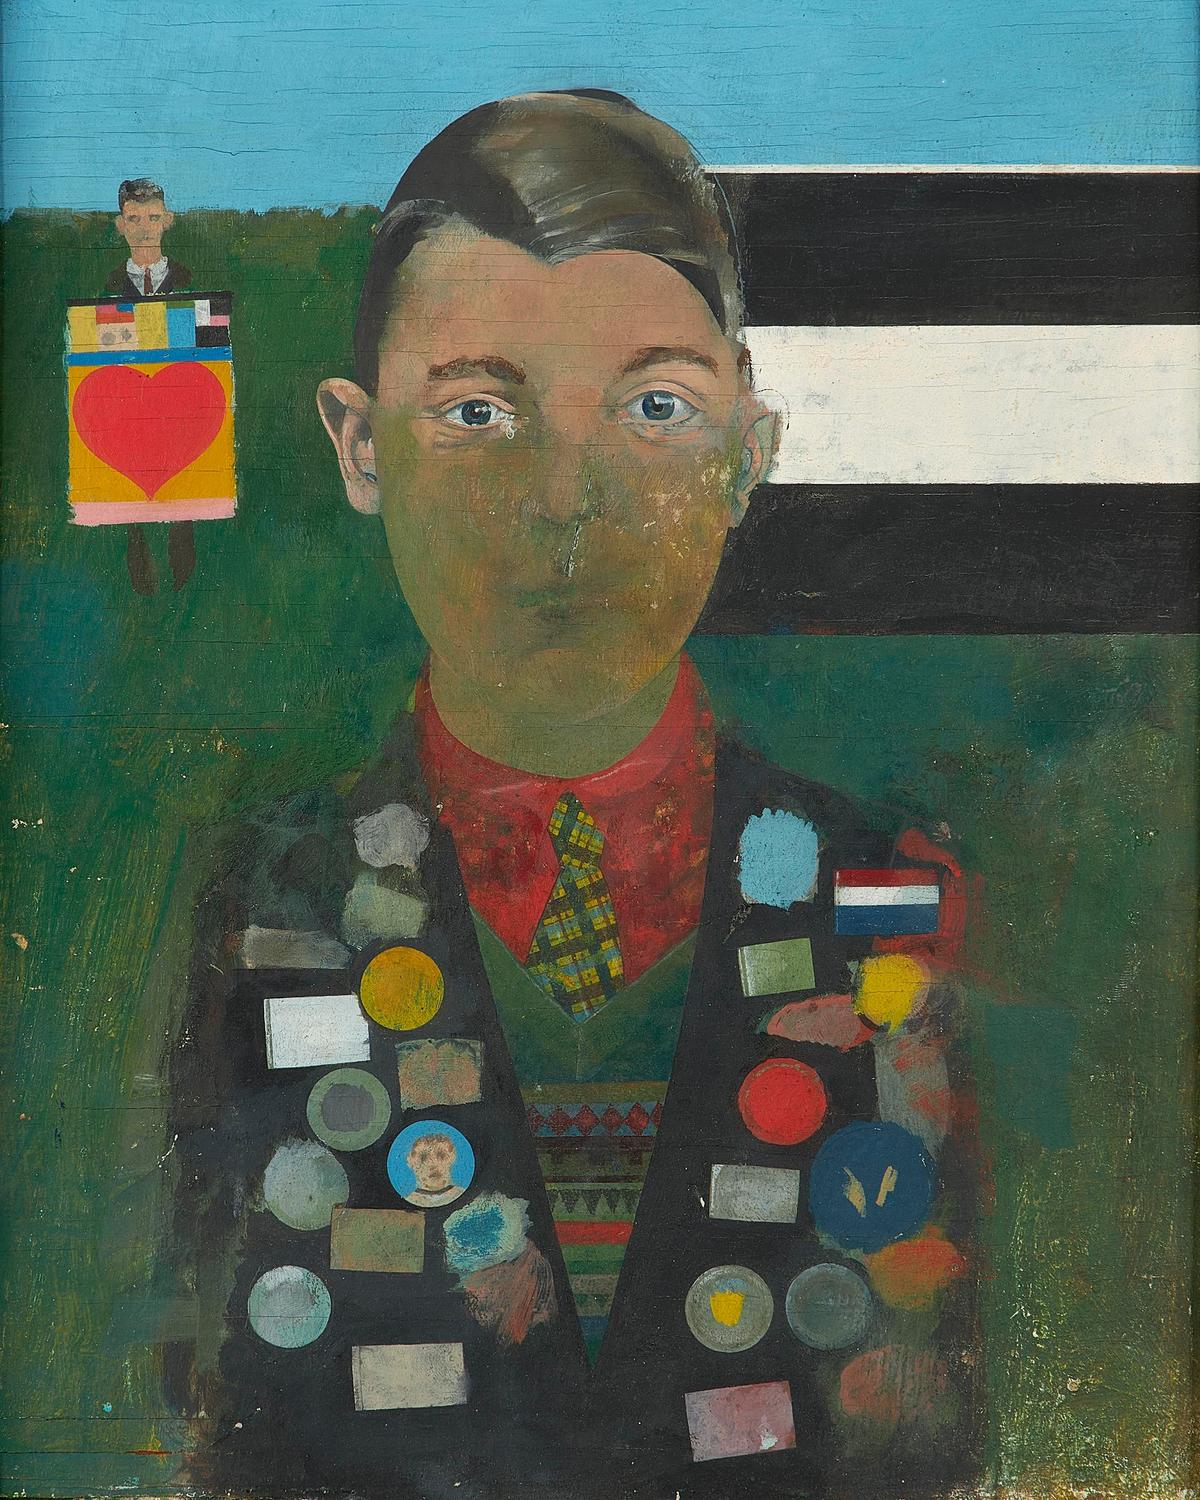 Peter Blake, Boy with Paintings  (1957-59) © Peter Blake. All Rights Reserved, DACS/Artimage 2020